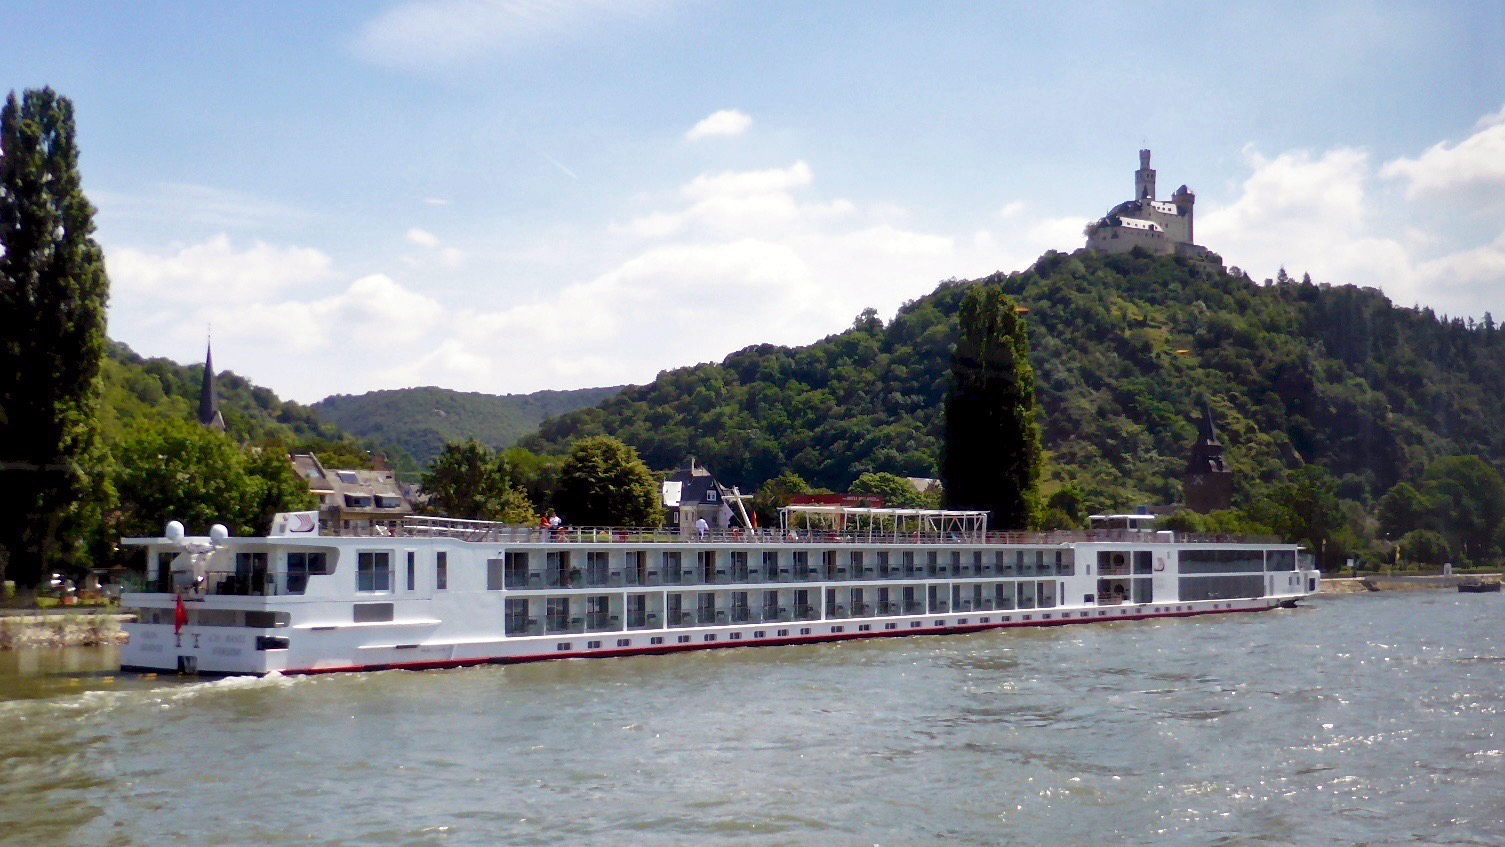 A passing Viking River Cruises' longship during our cruise past castles of the Rhine